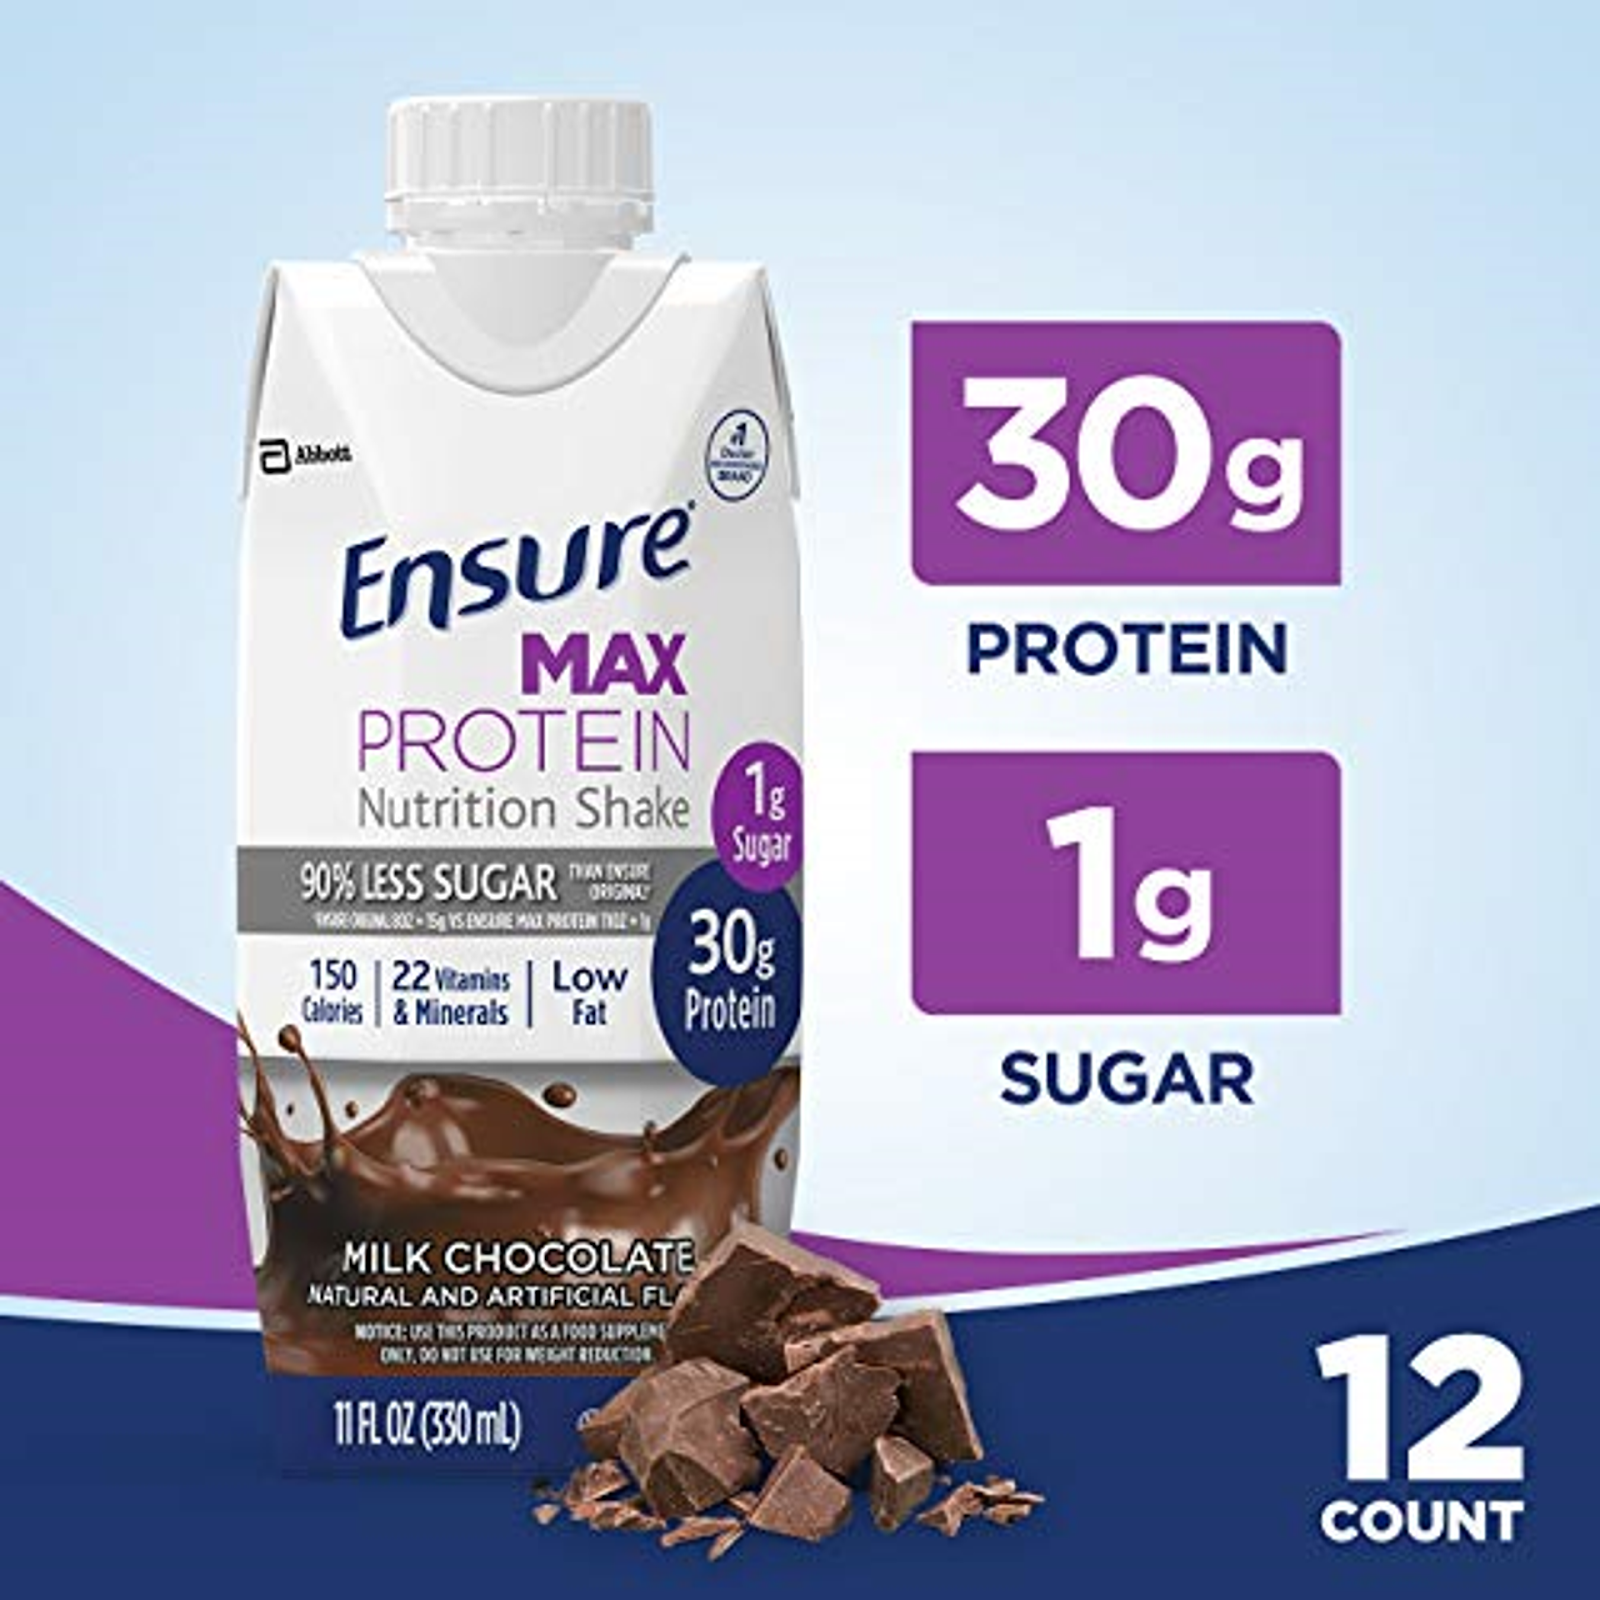 Ensure Max Protein Nutrition Shakes Milk Chocolate 11 oz - 12 Pack